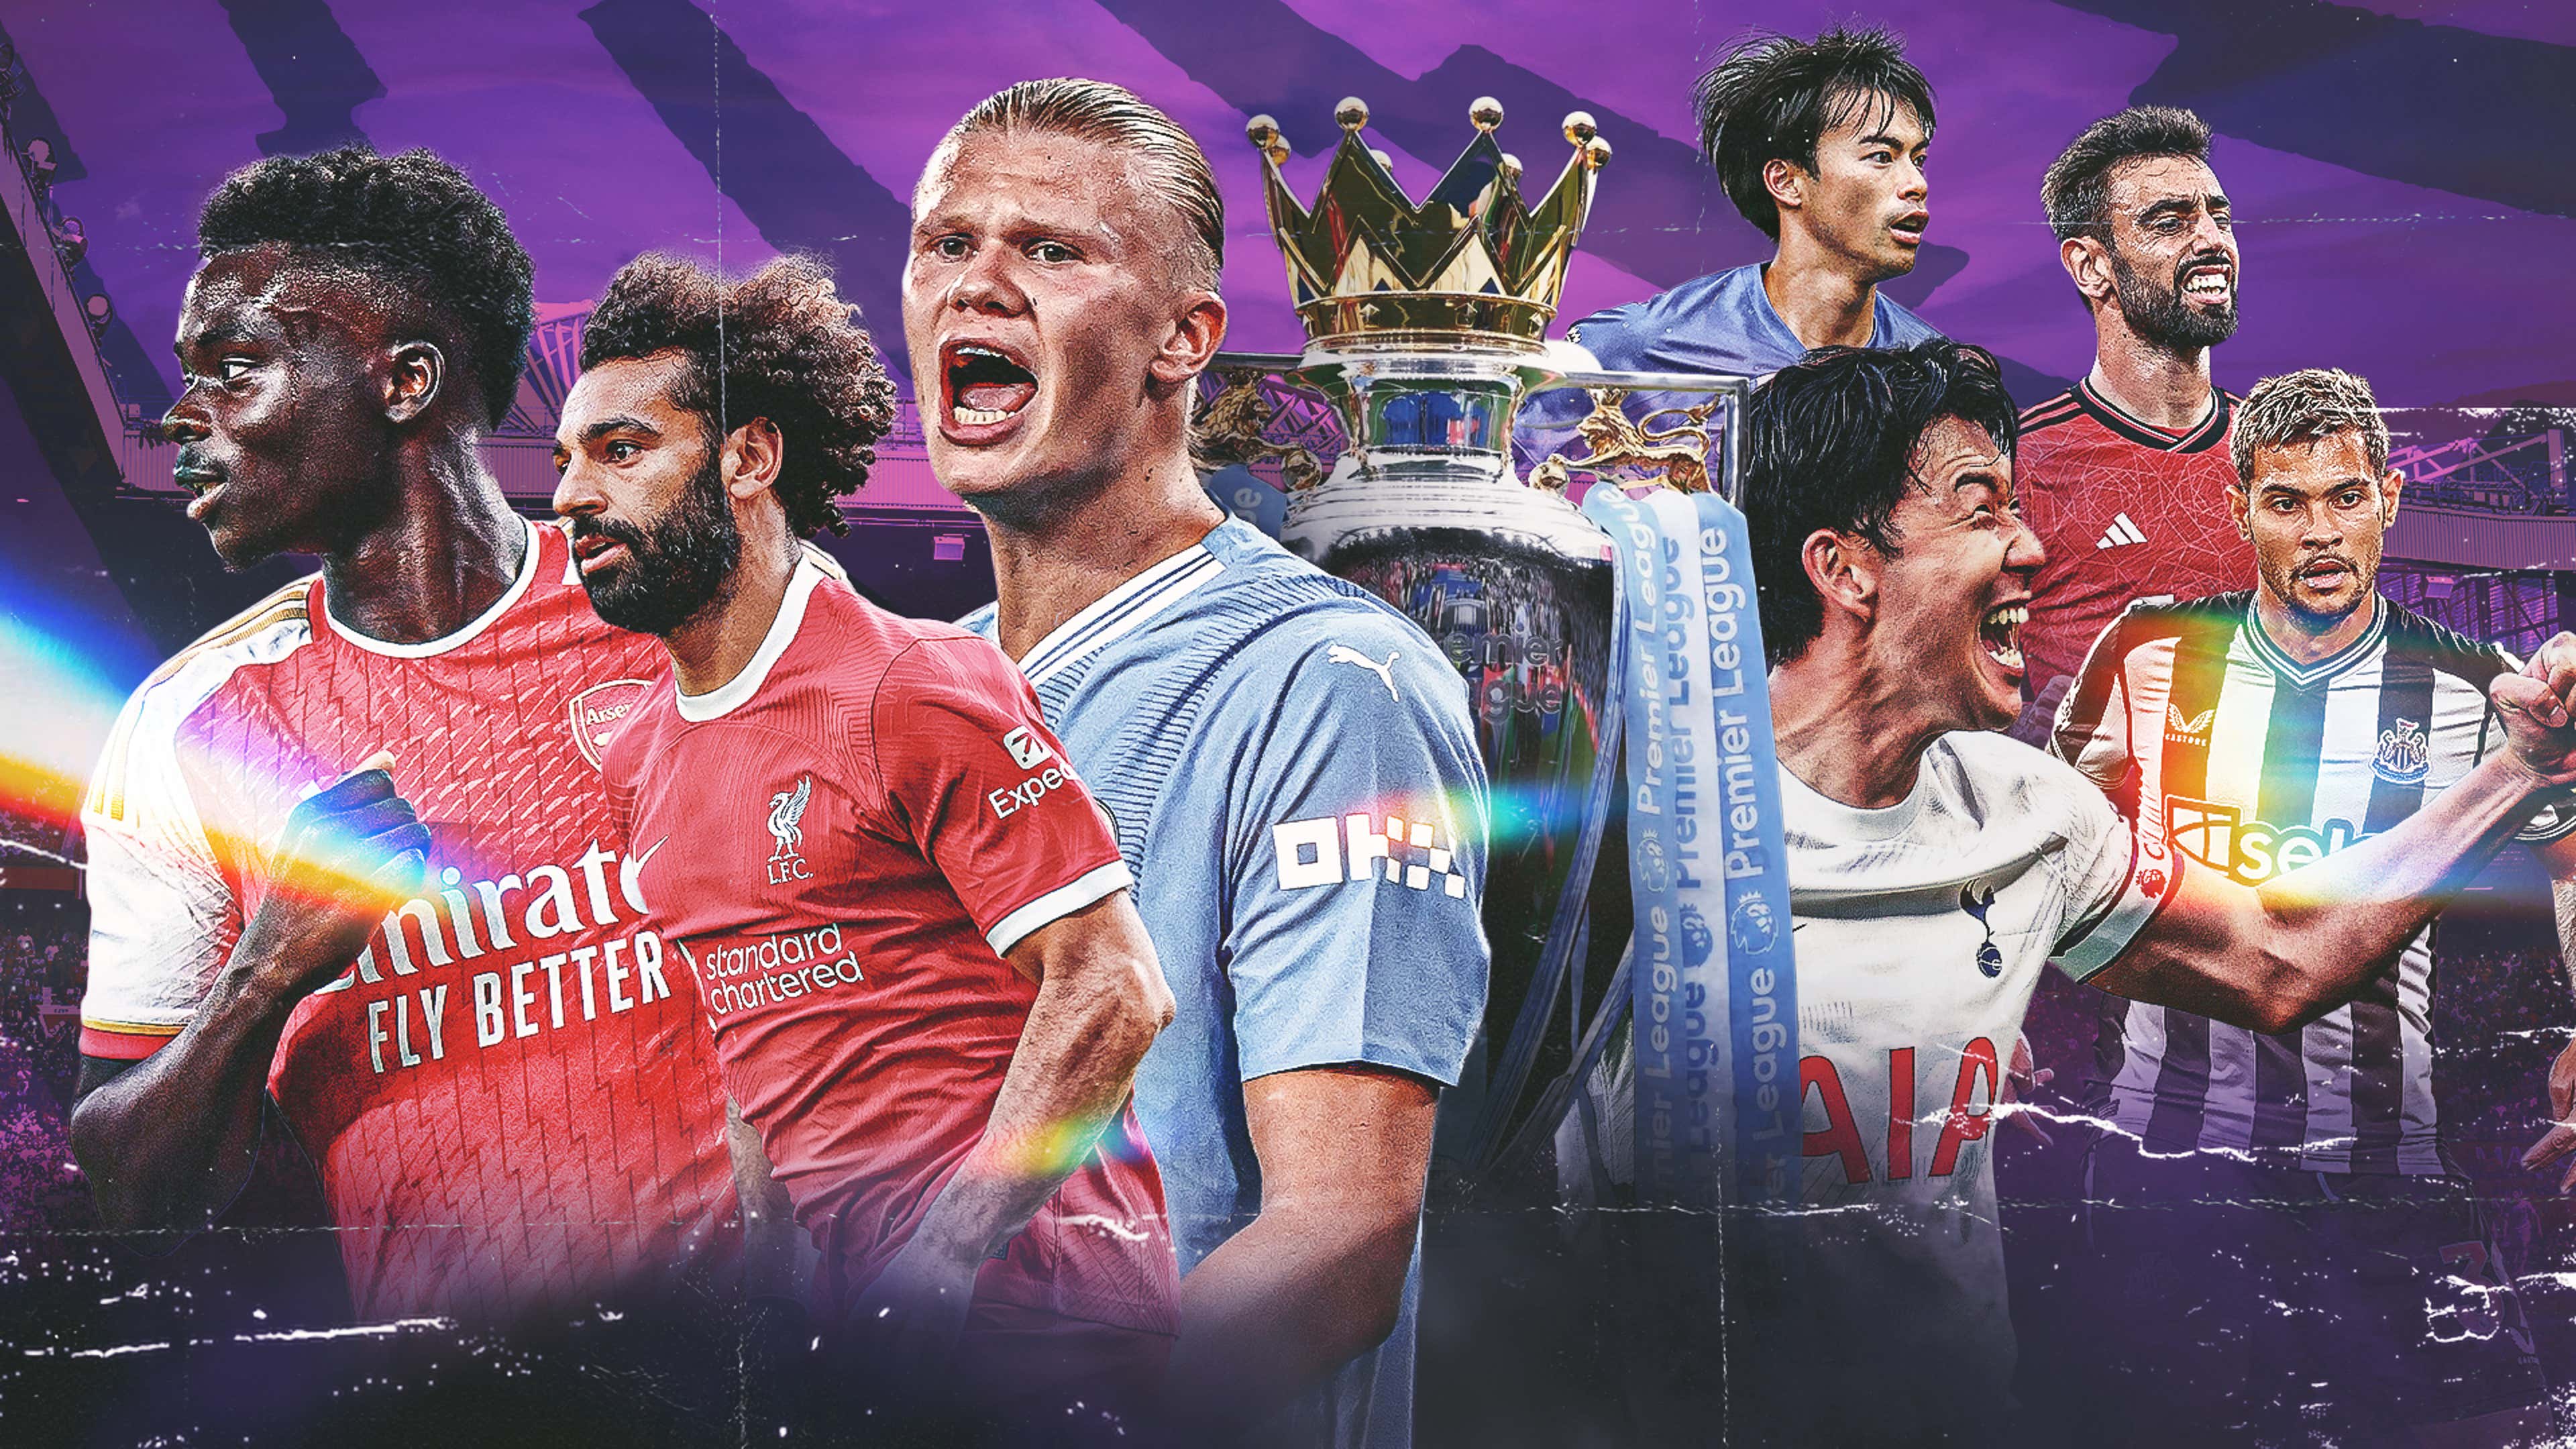 Premier League Legends: Where to Watch and Stream Online